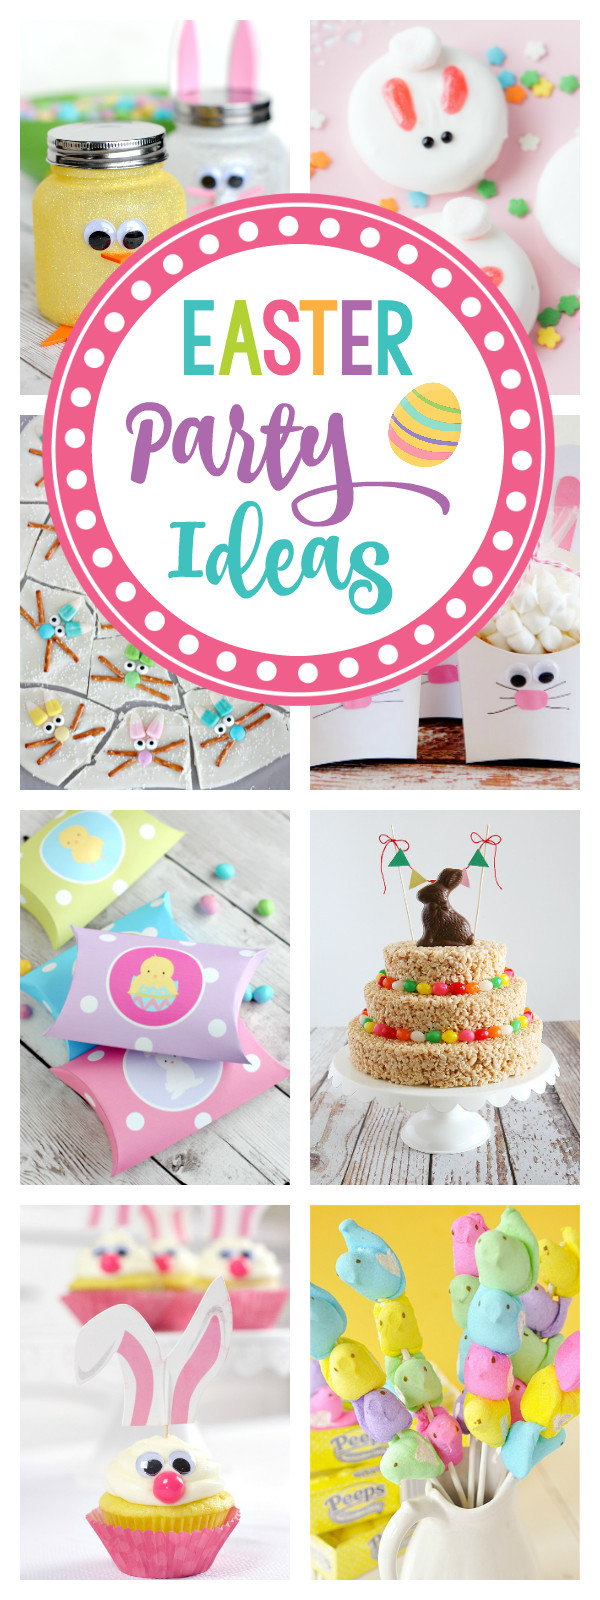 Easter School Party Ideas
 25 Fun Easter Party Ideas for Kids – Fun Squared